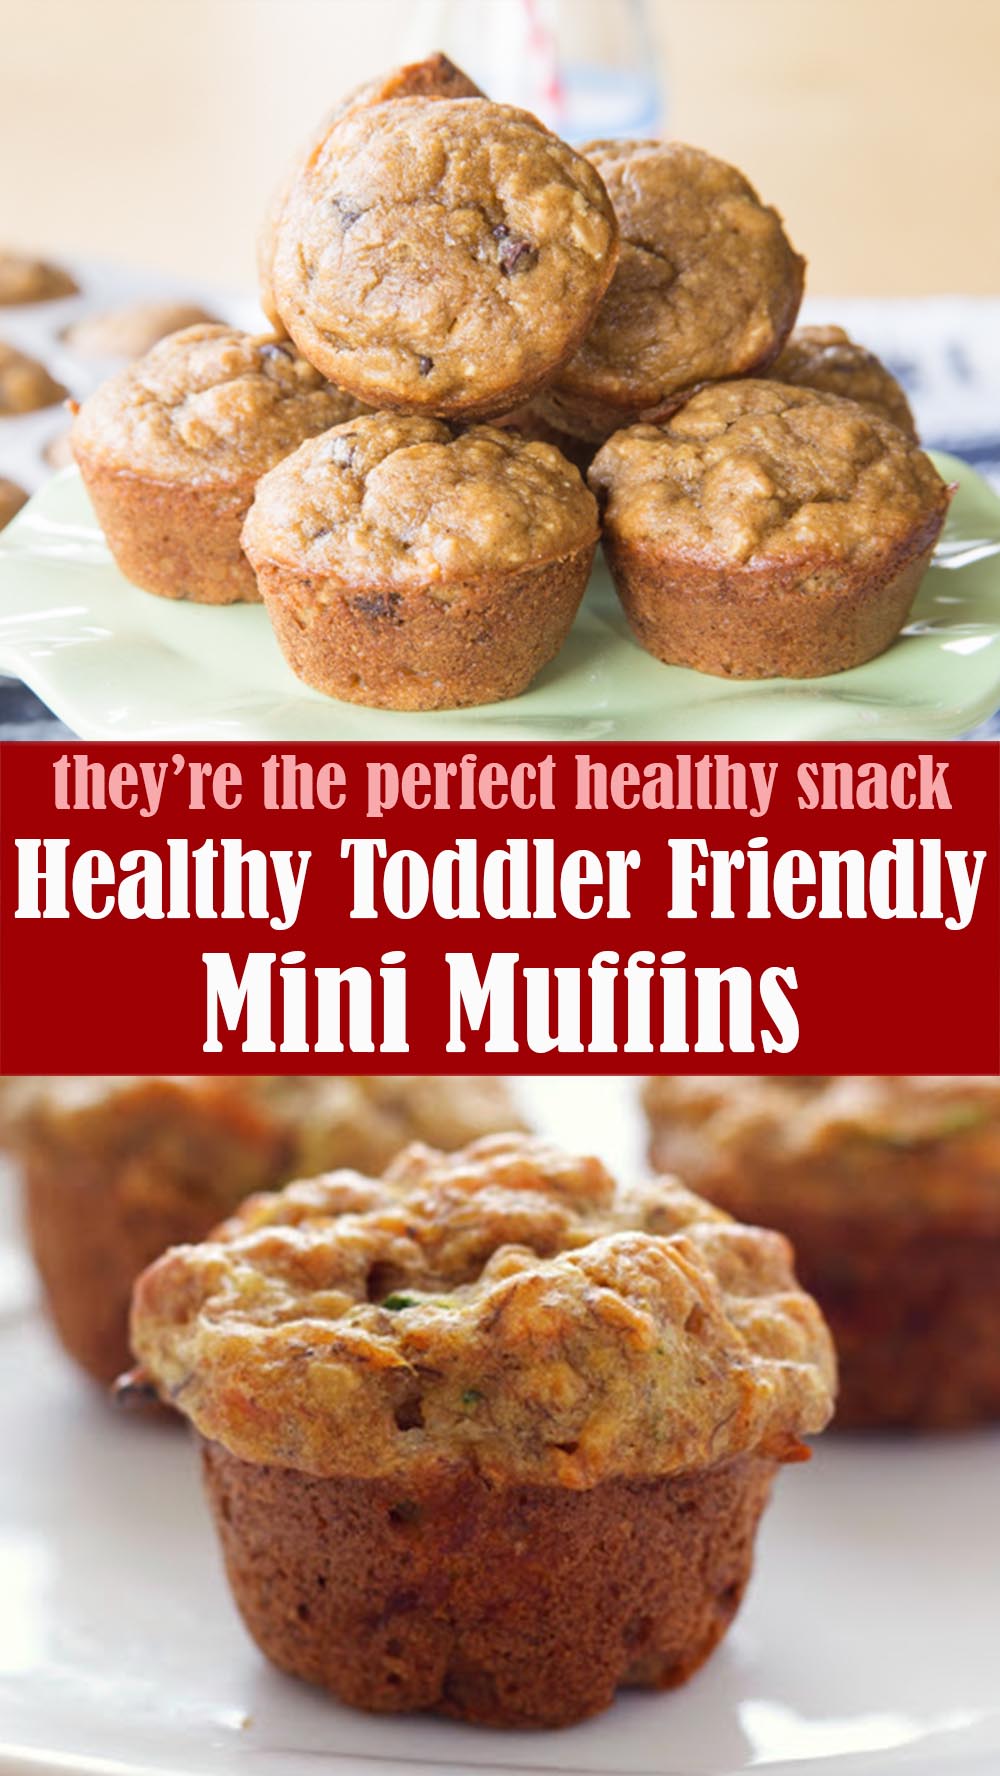 Healthy Toddler Friendly Mini Muffins Recipe